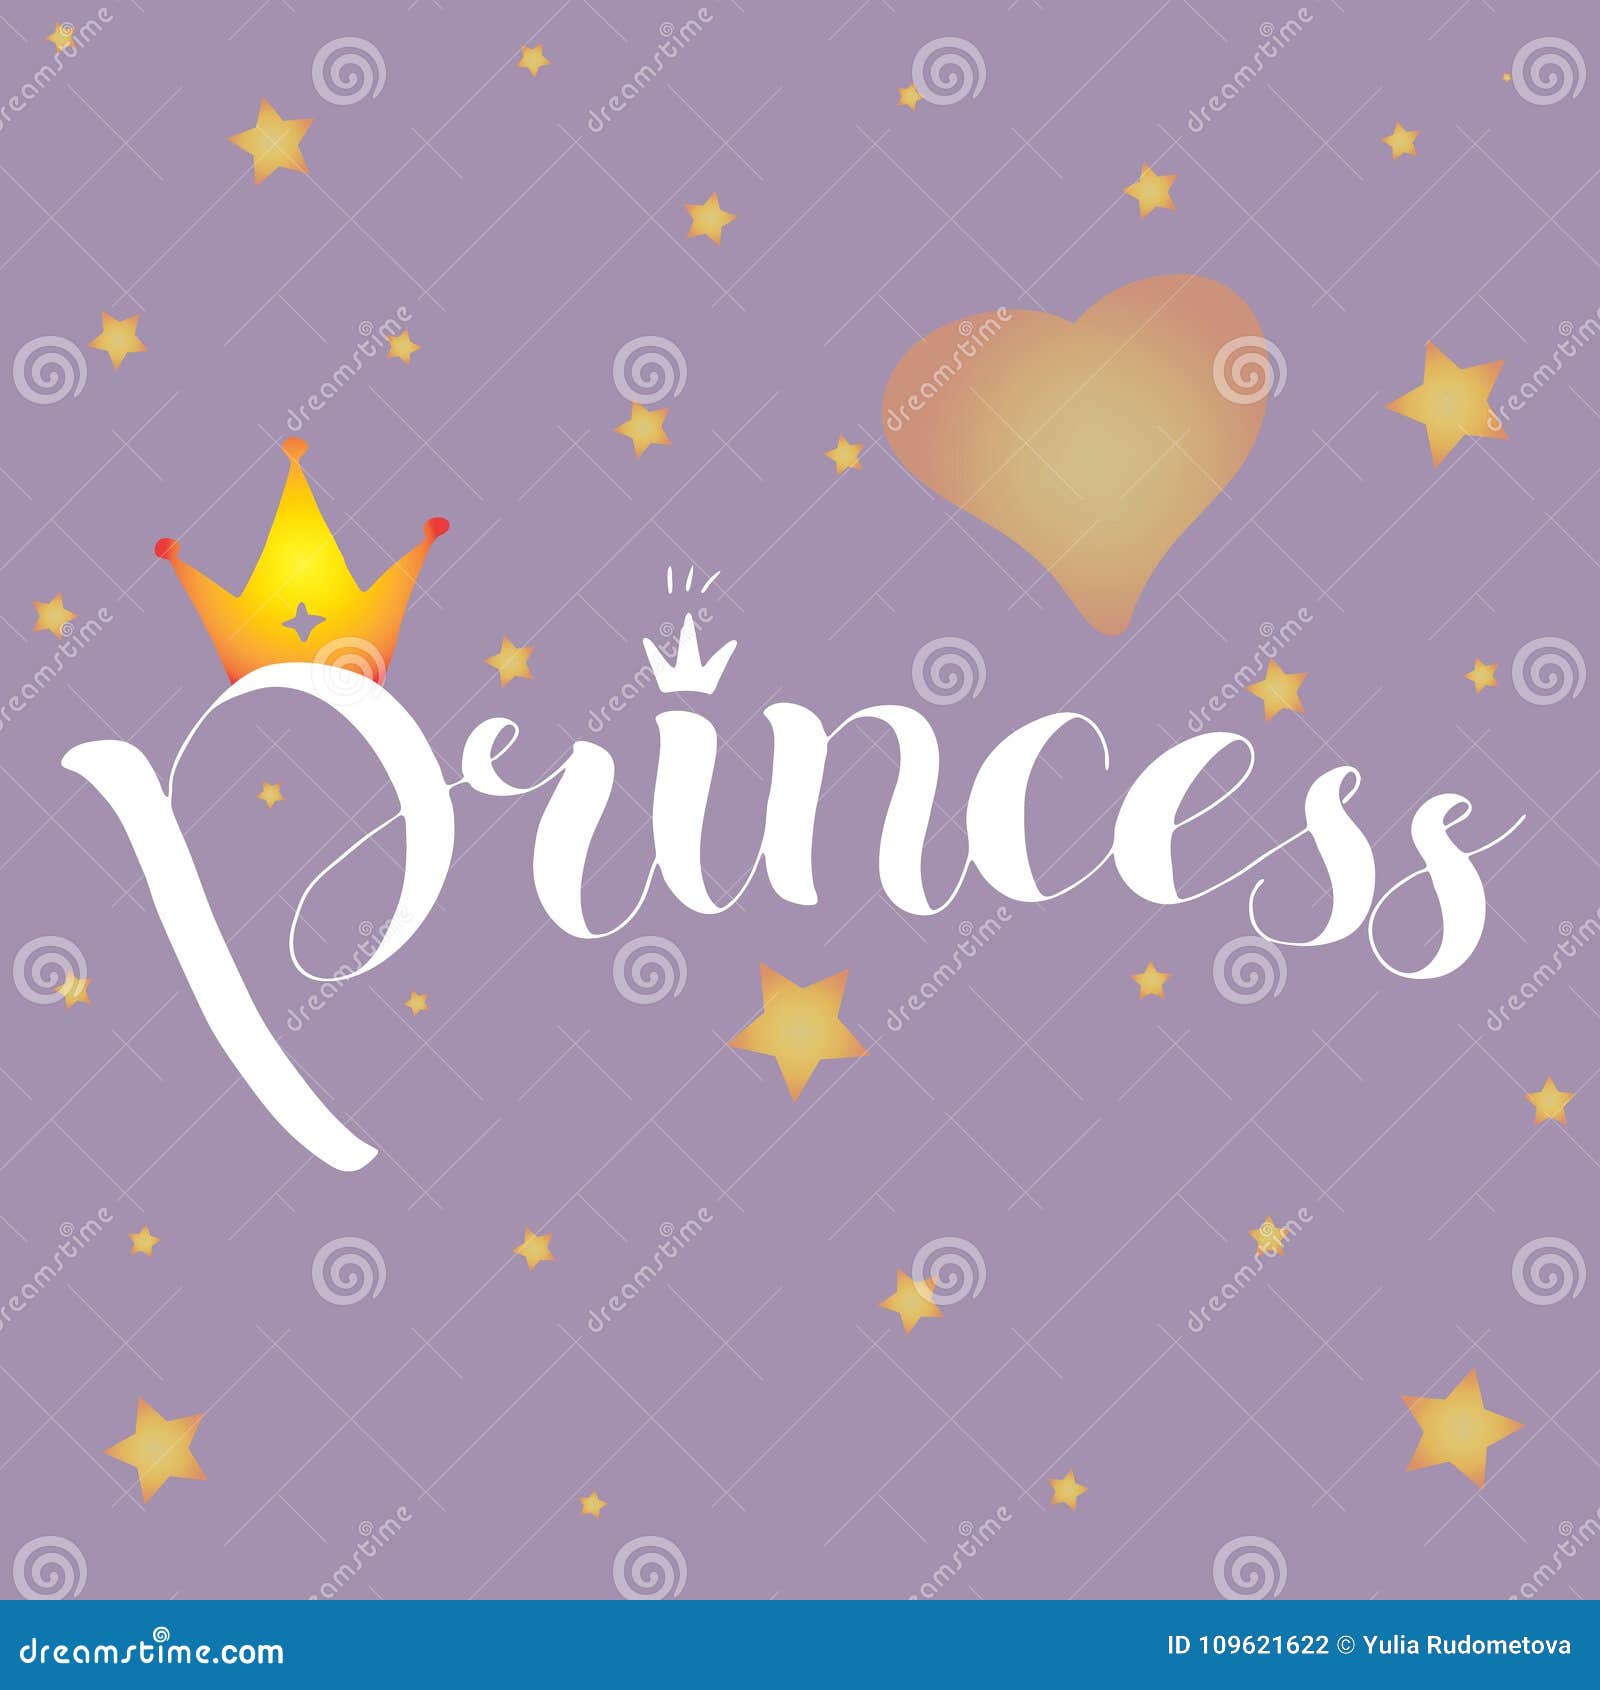 Vector Illustration of Princess Text for Girls Clothes, with Place